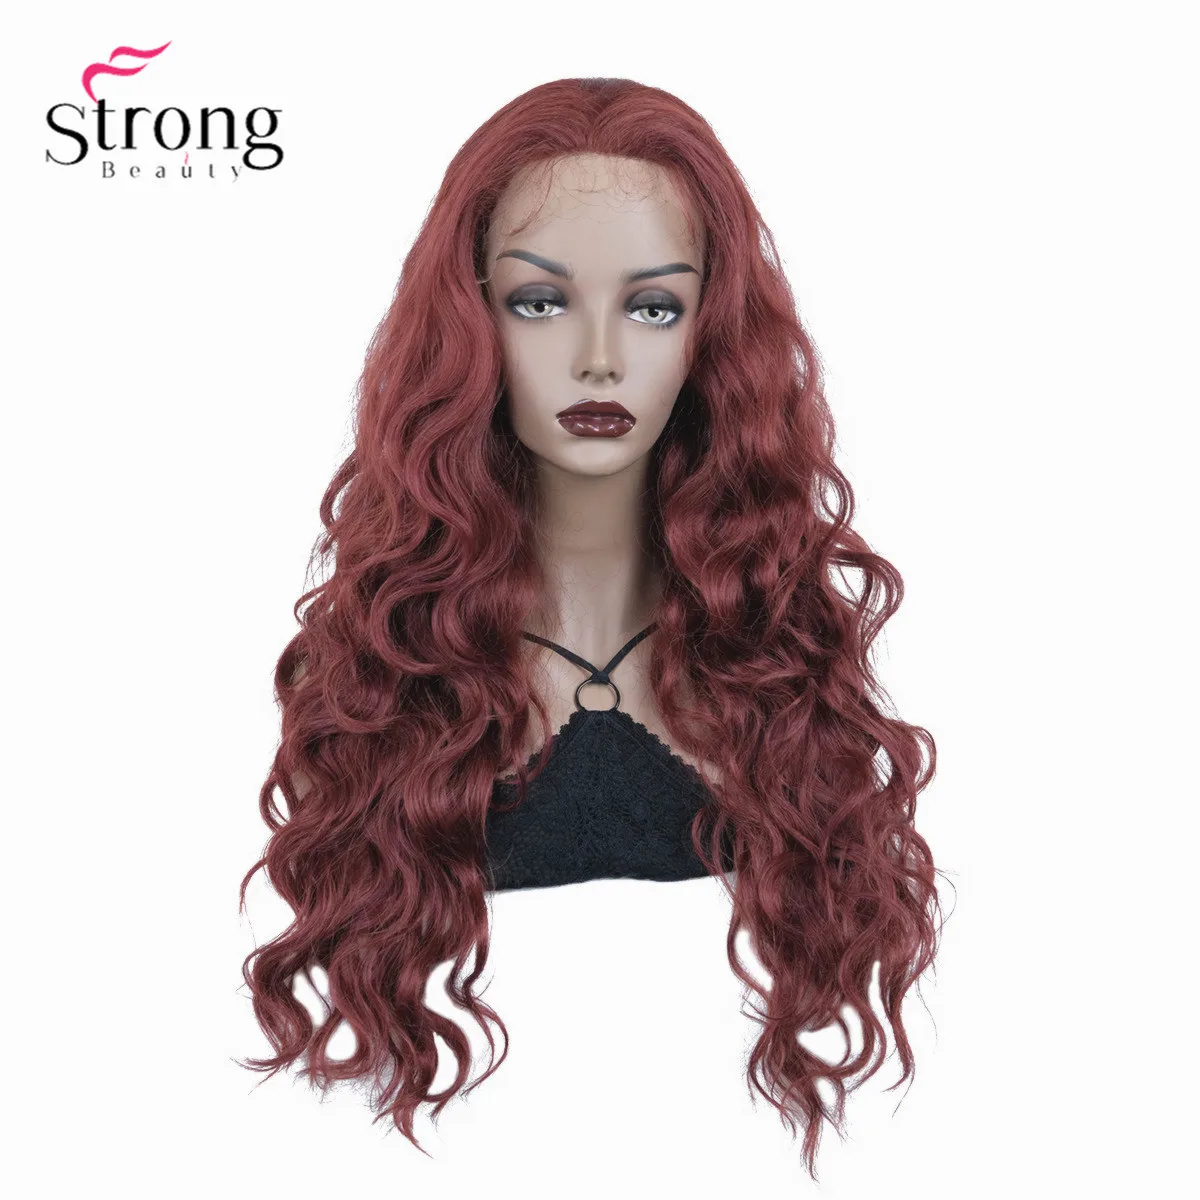 StrongBeauty Red Long Curly Hair Lace Front Wigs for women Synthetic Wig